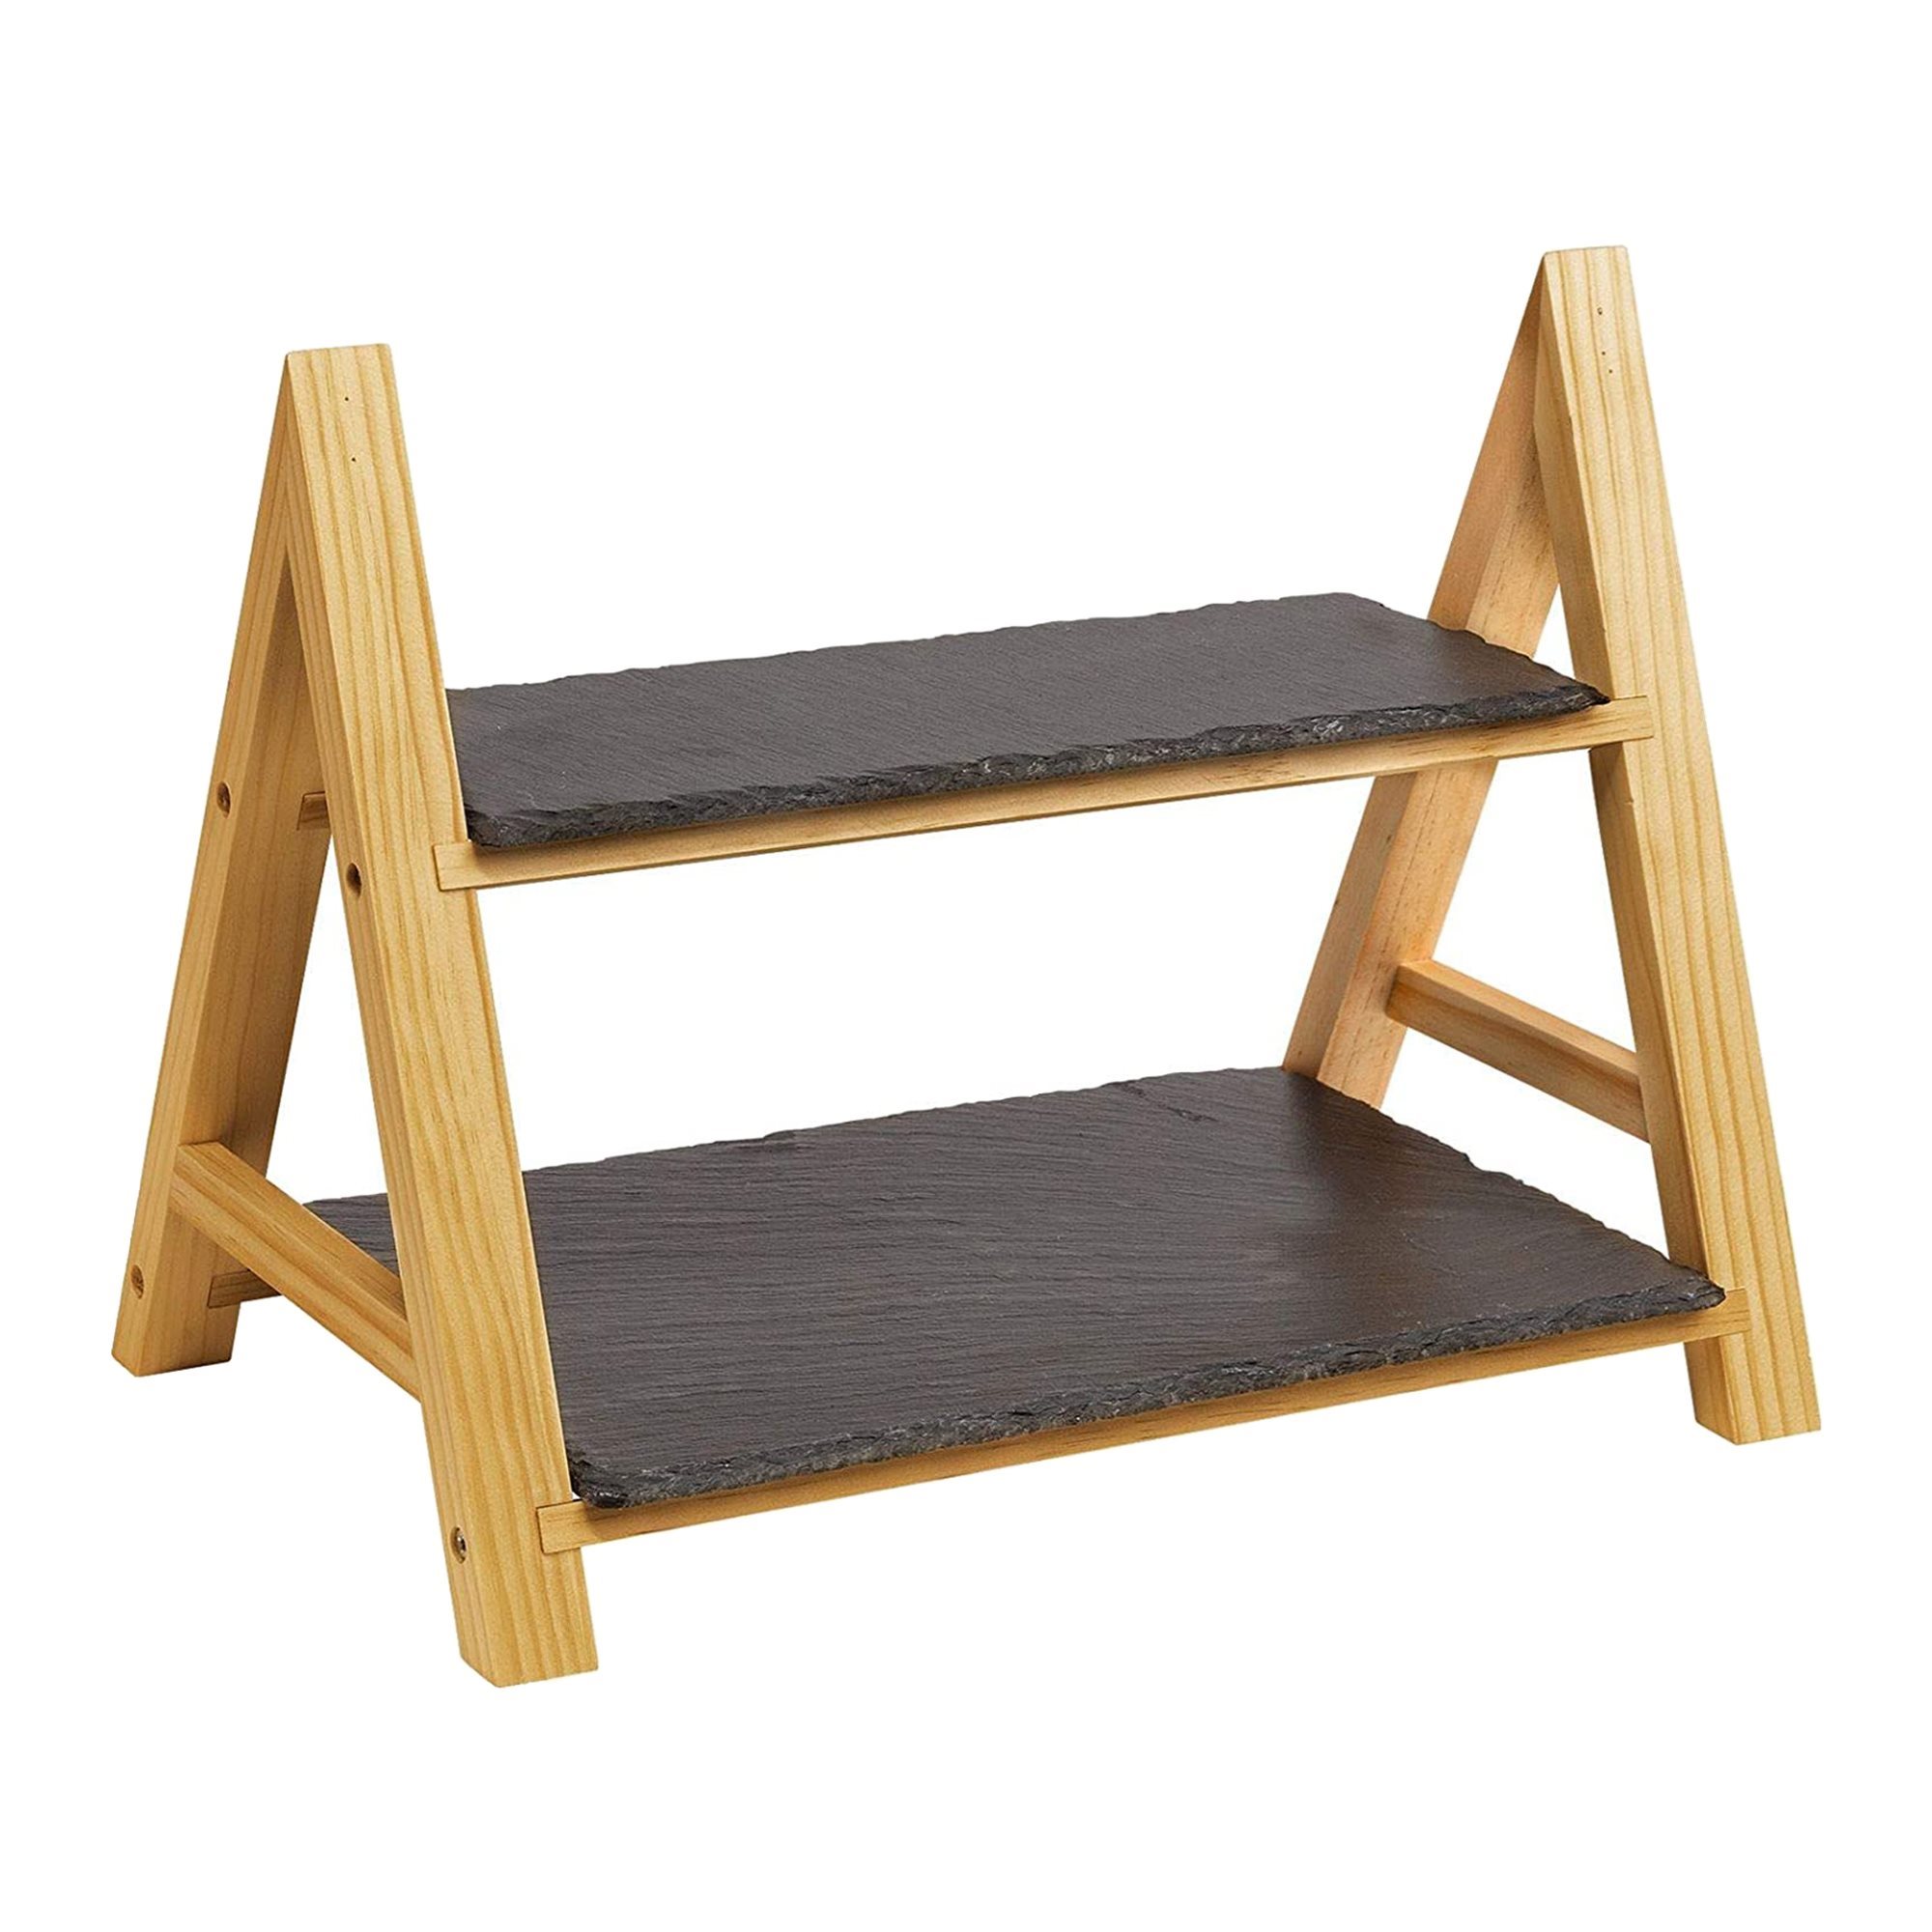 Wood easels photo stand size 20cm x 27cm